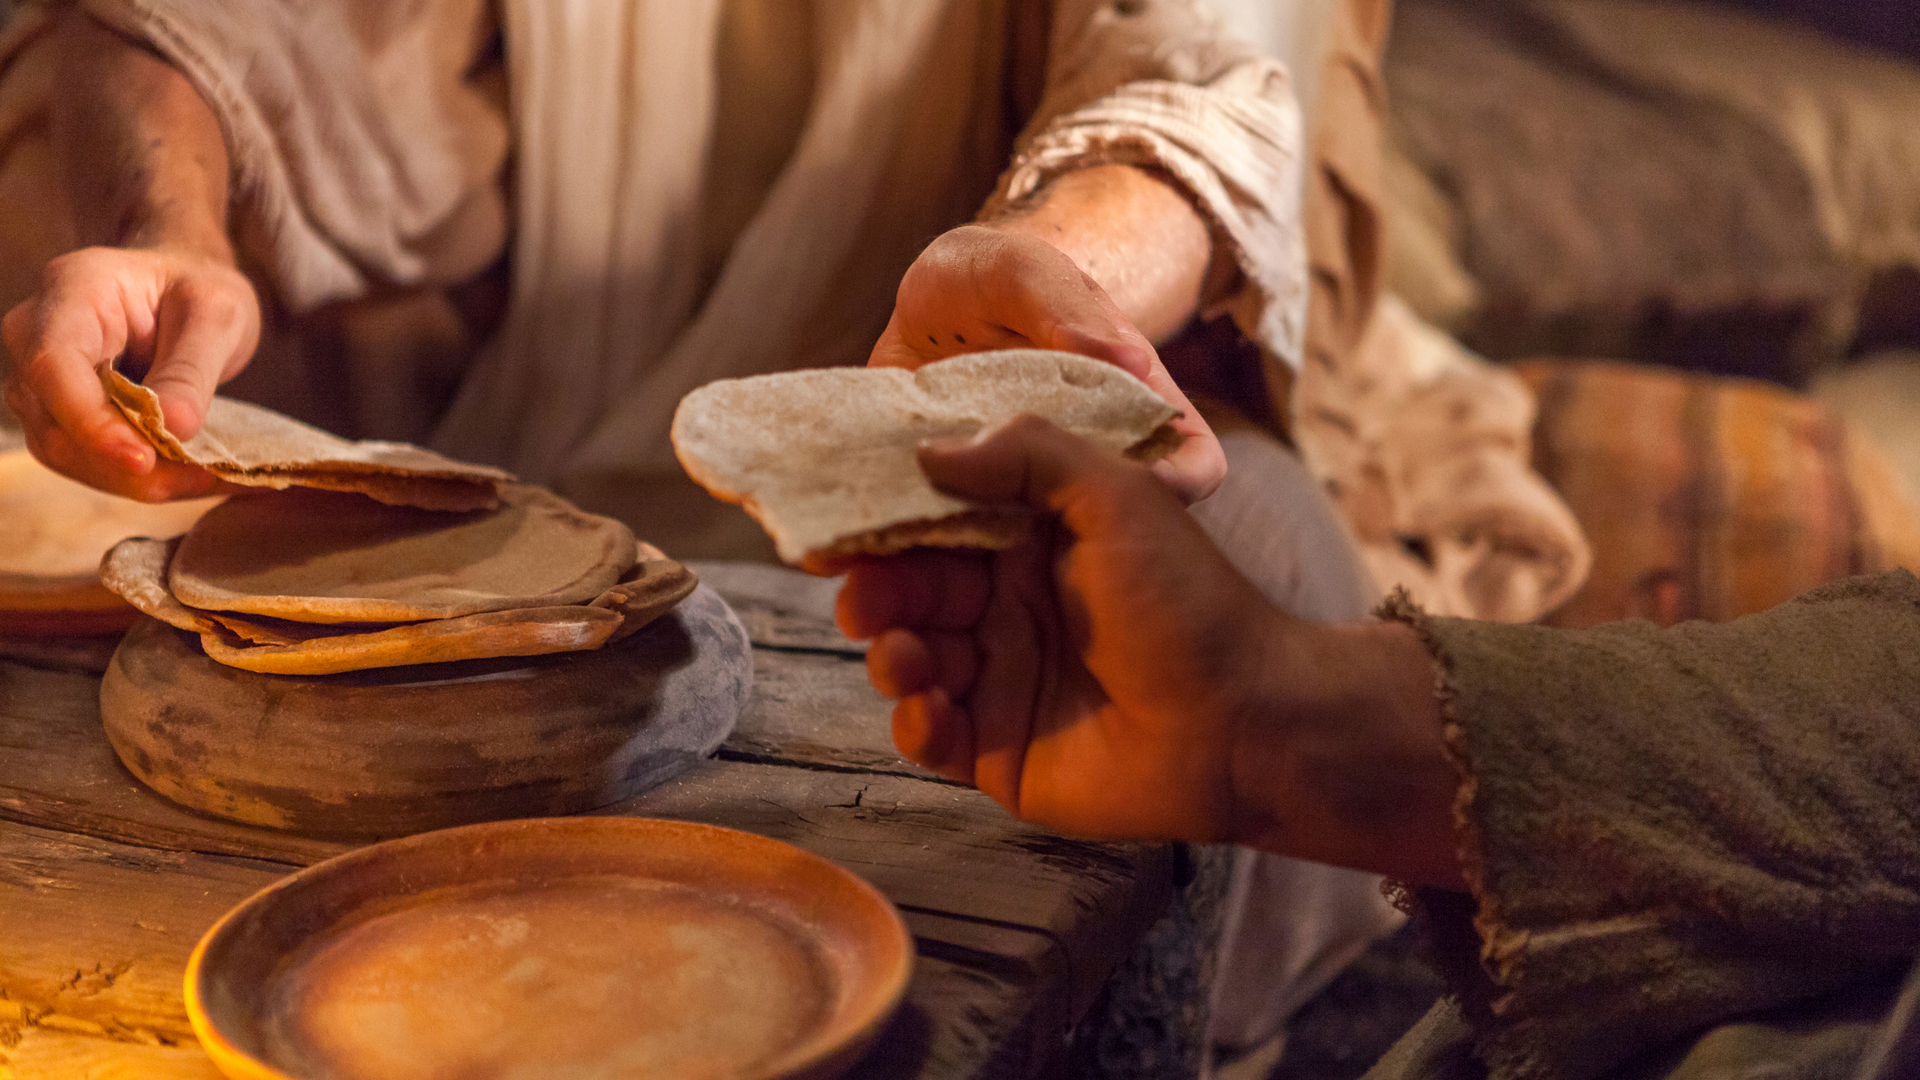 A person breaks bread and hands it to someone. Bread is one example of Passover imagery Jesus Christ used in his "Bread of Life" sermon. Image courtesy churchofjesuschrist.org